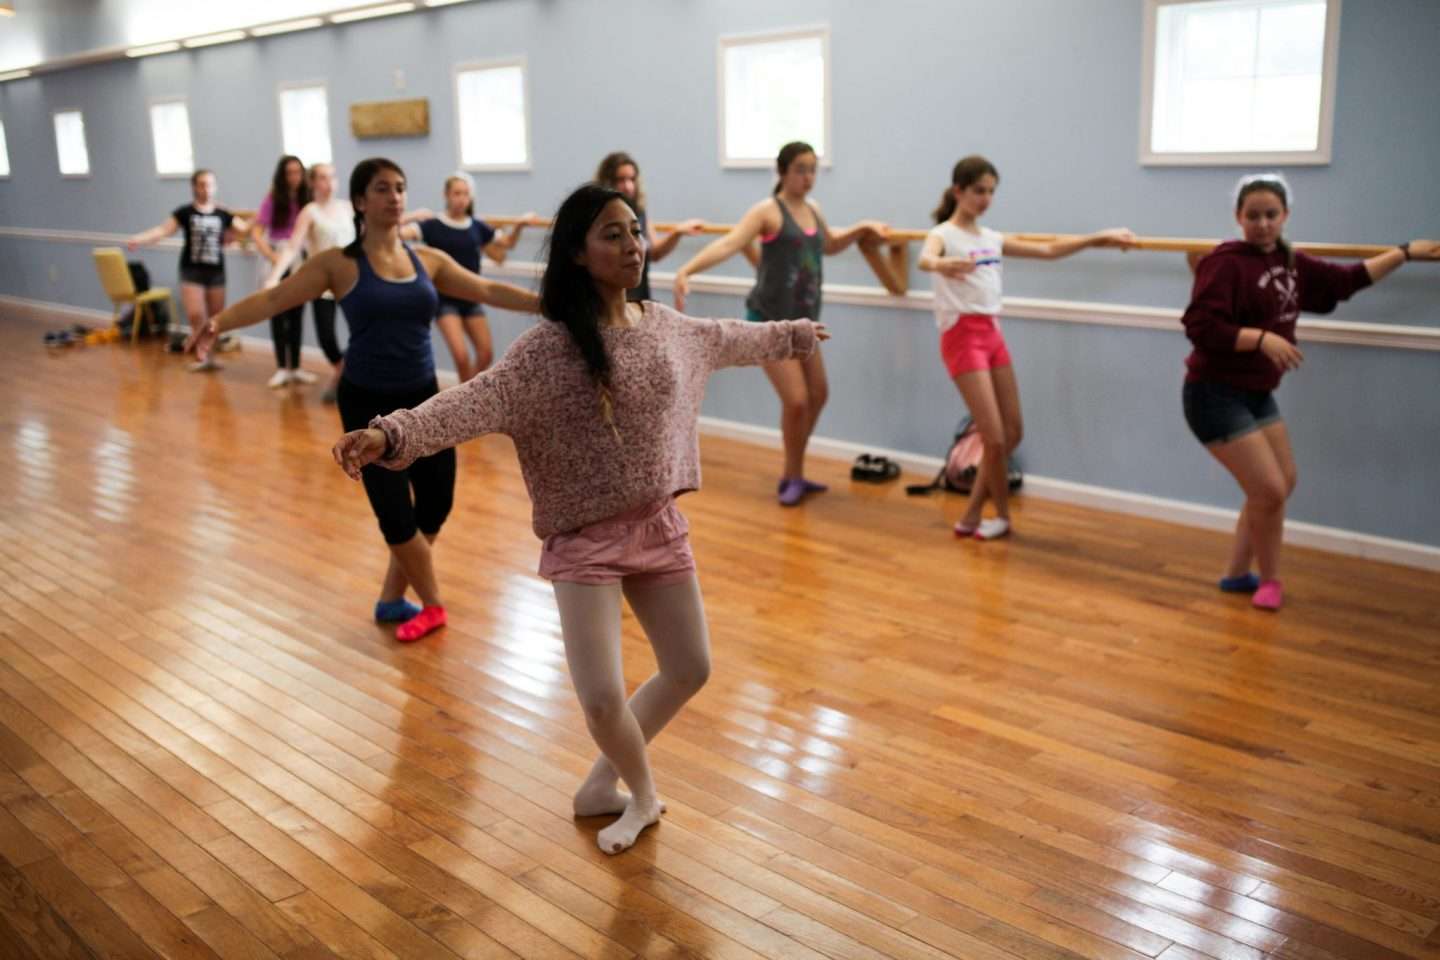 Group of female campers in the dance hall practising ballet